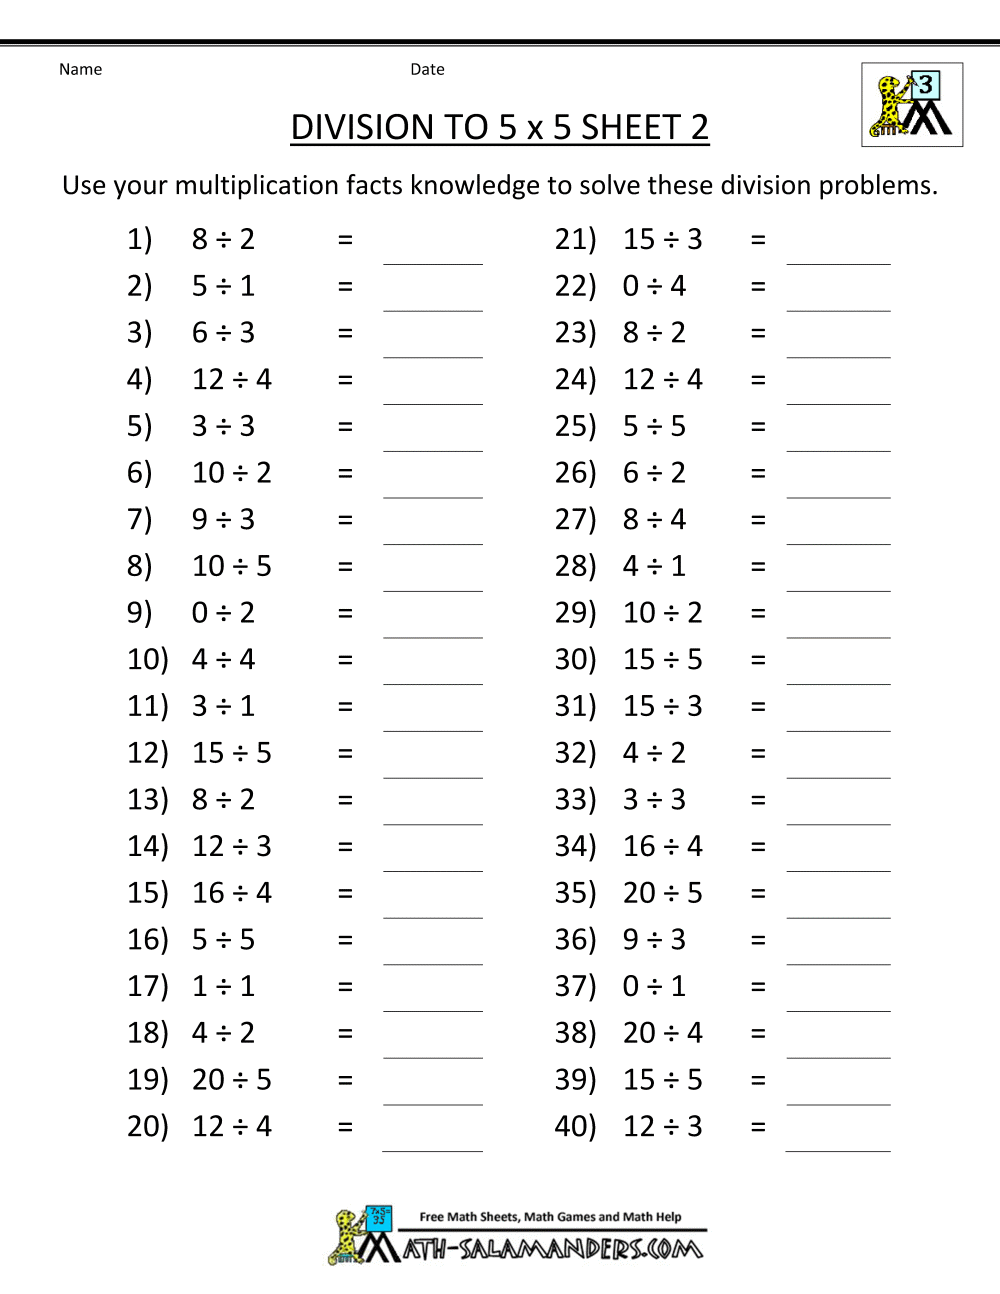 Division Table Worksheets